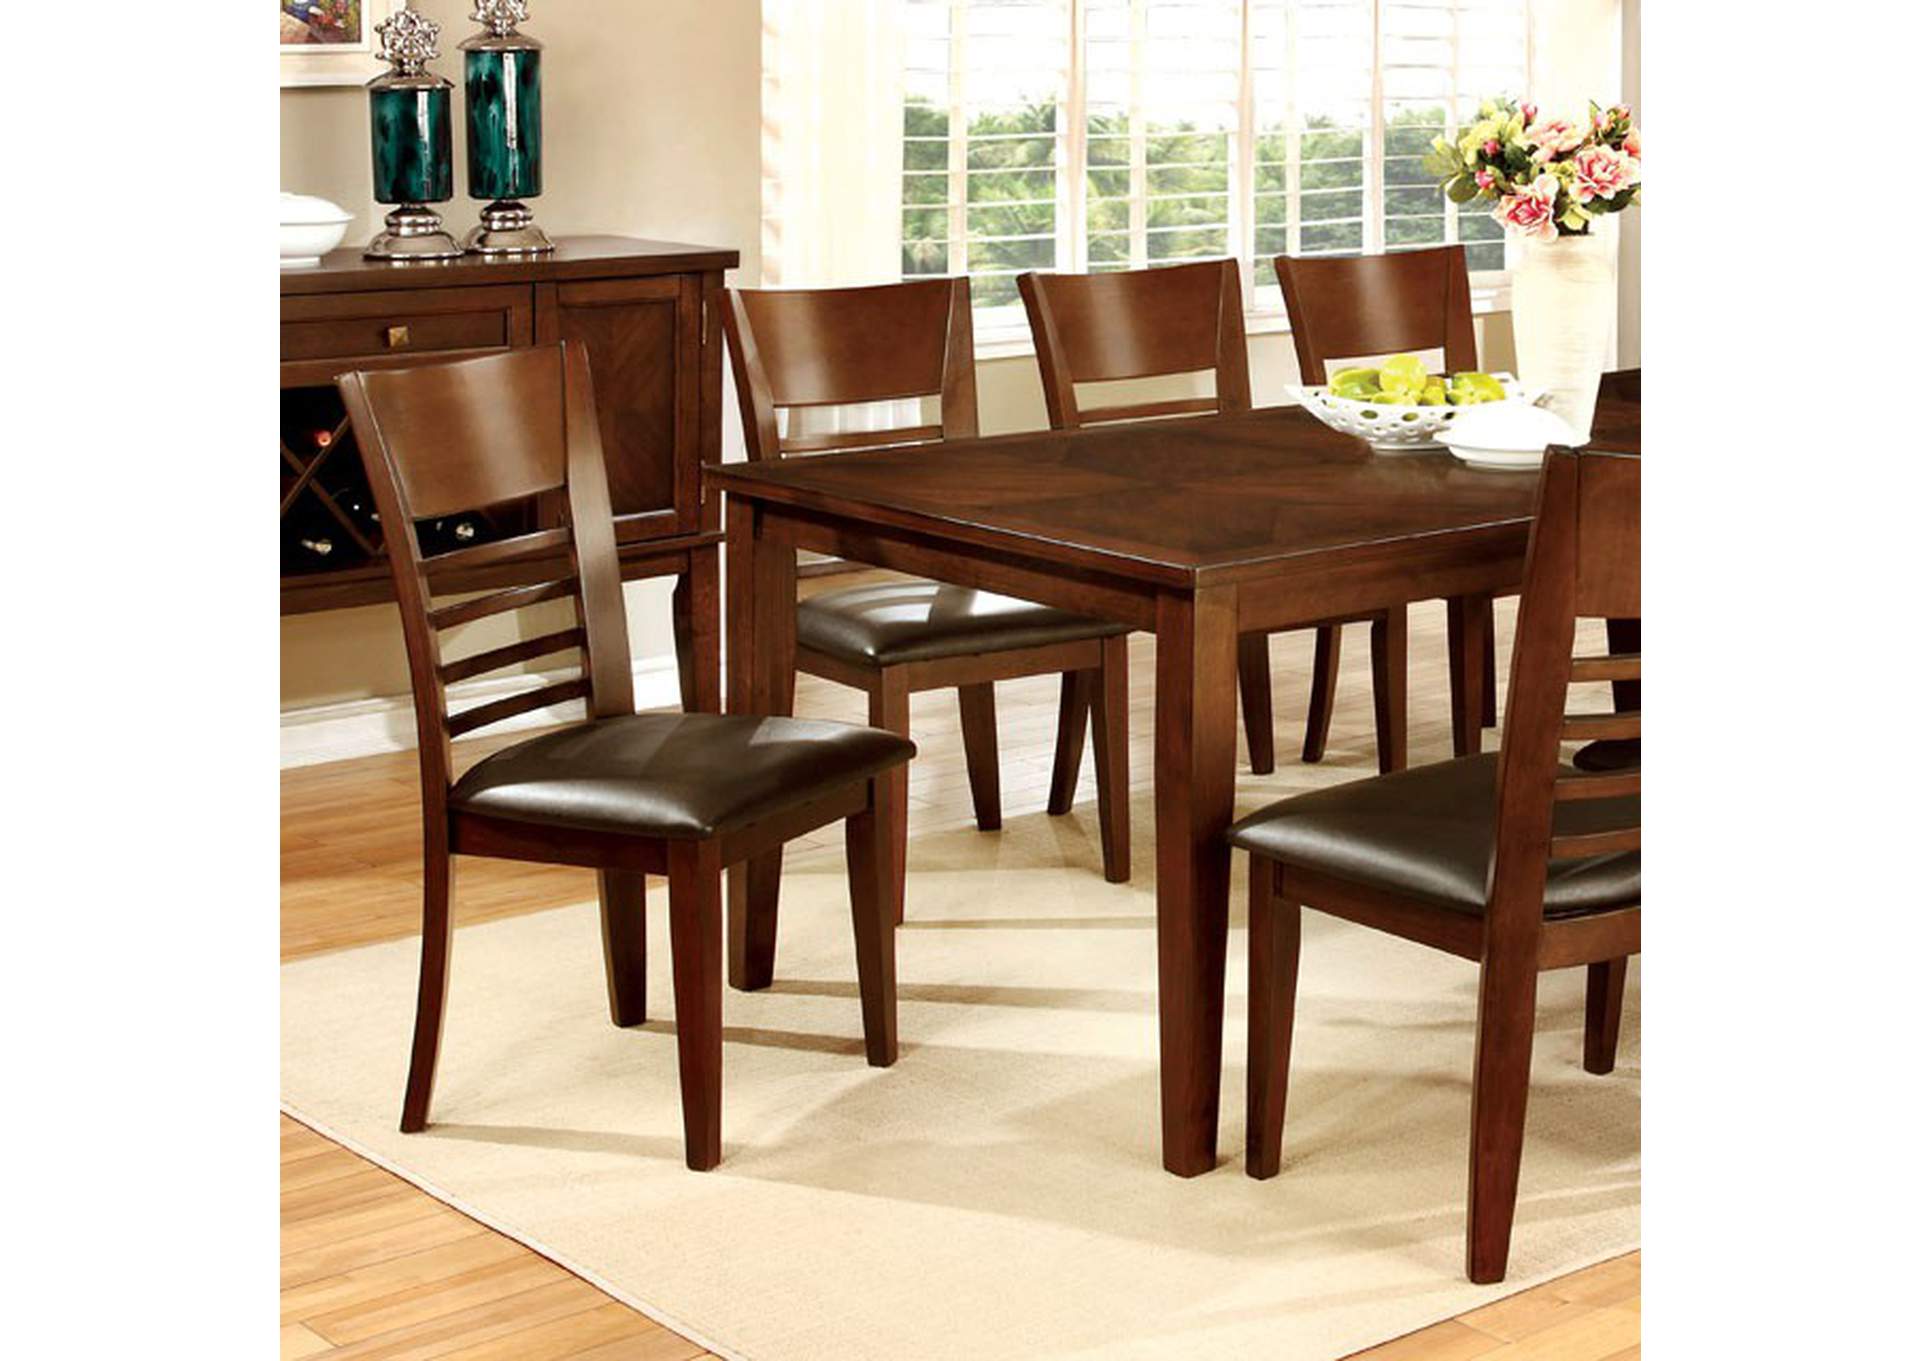 Hillsview l 78" Extension Leaf Dining Table,Furniture of America